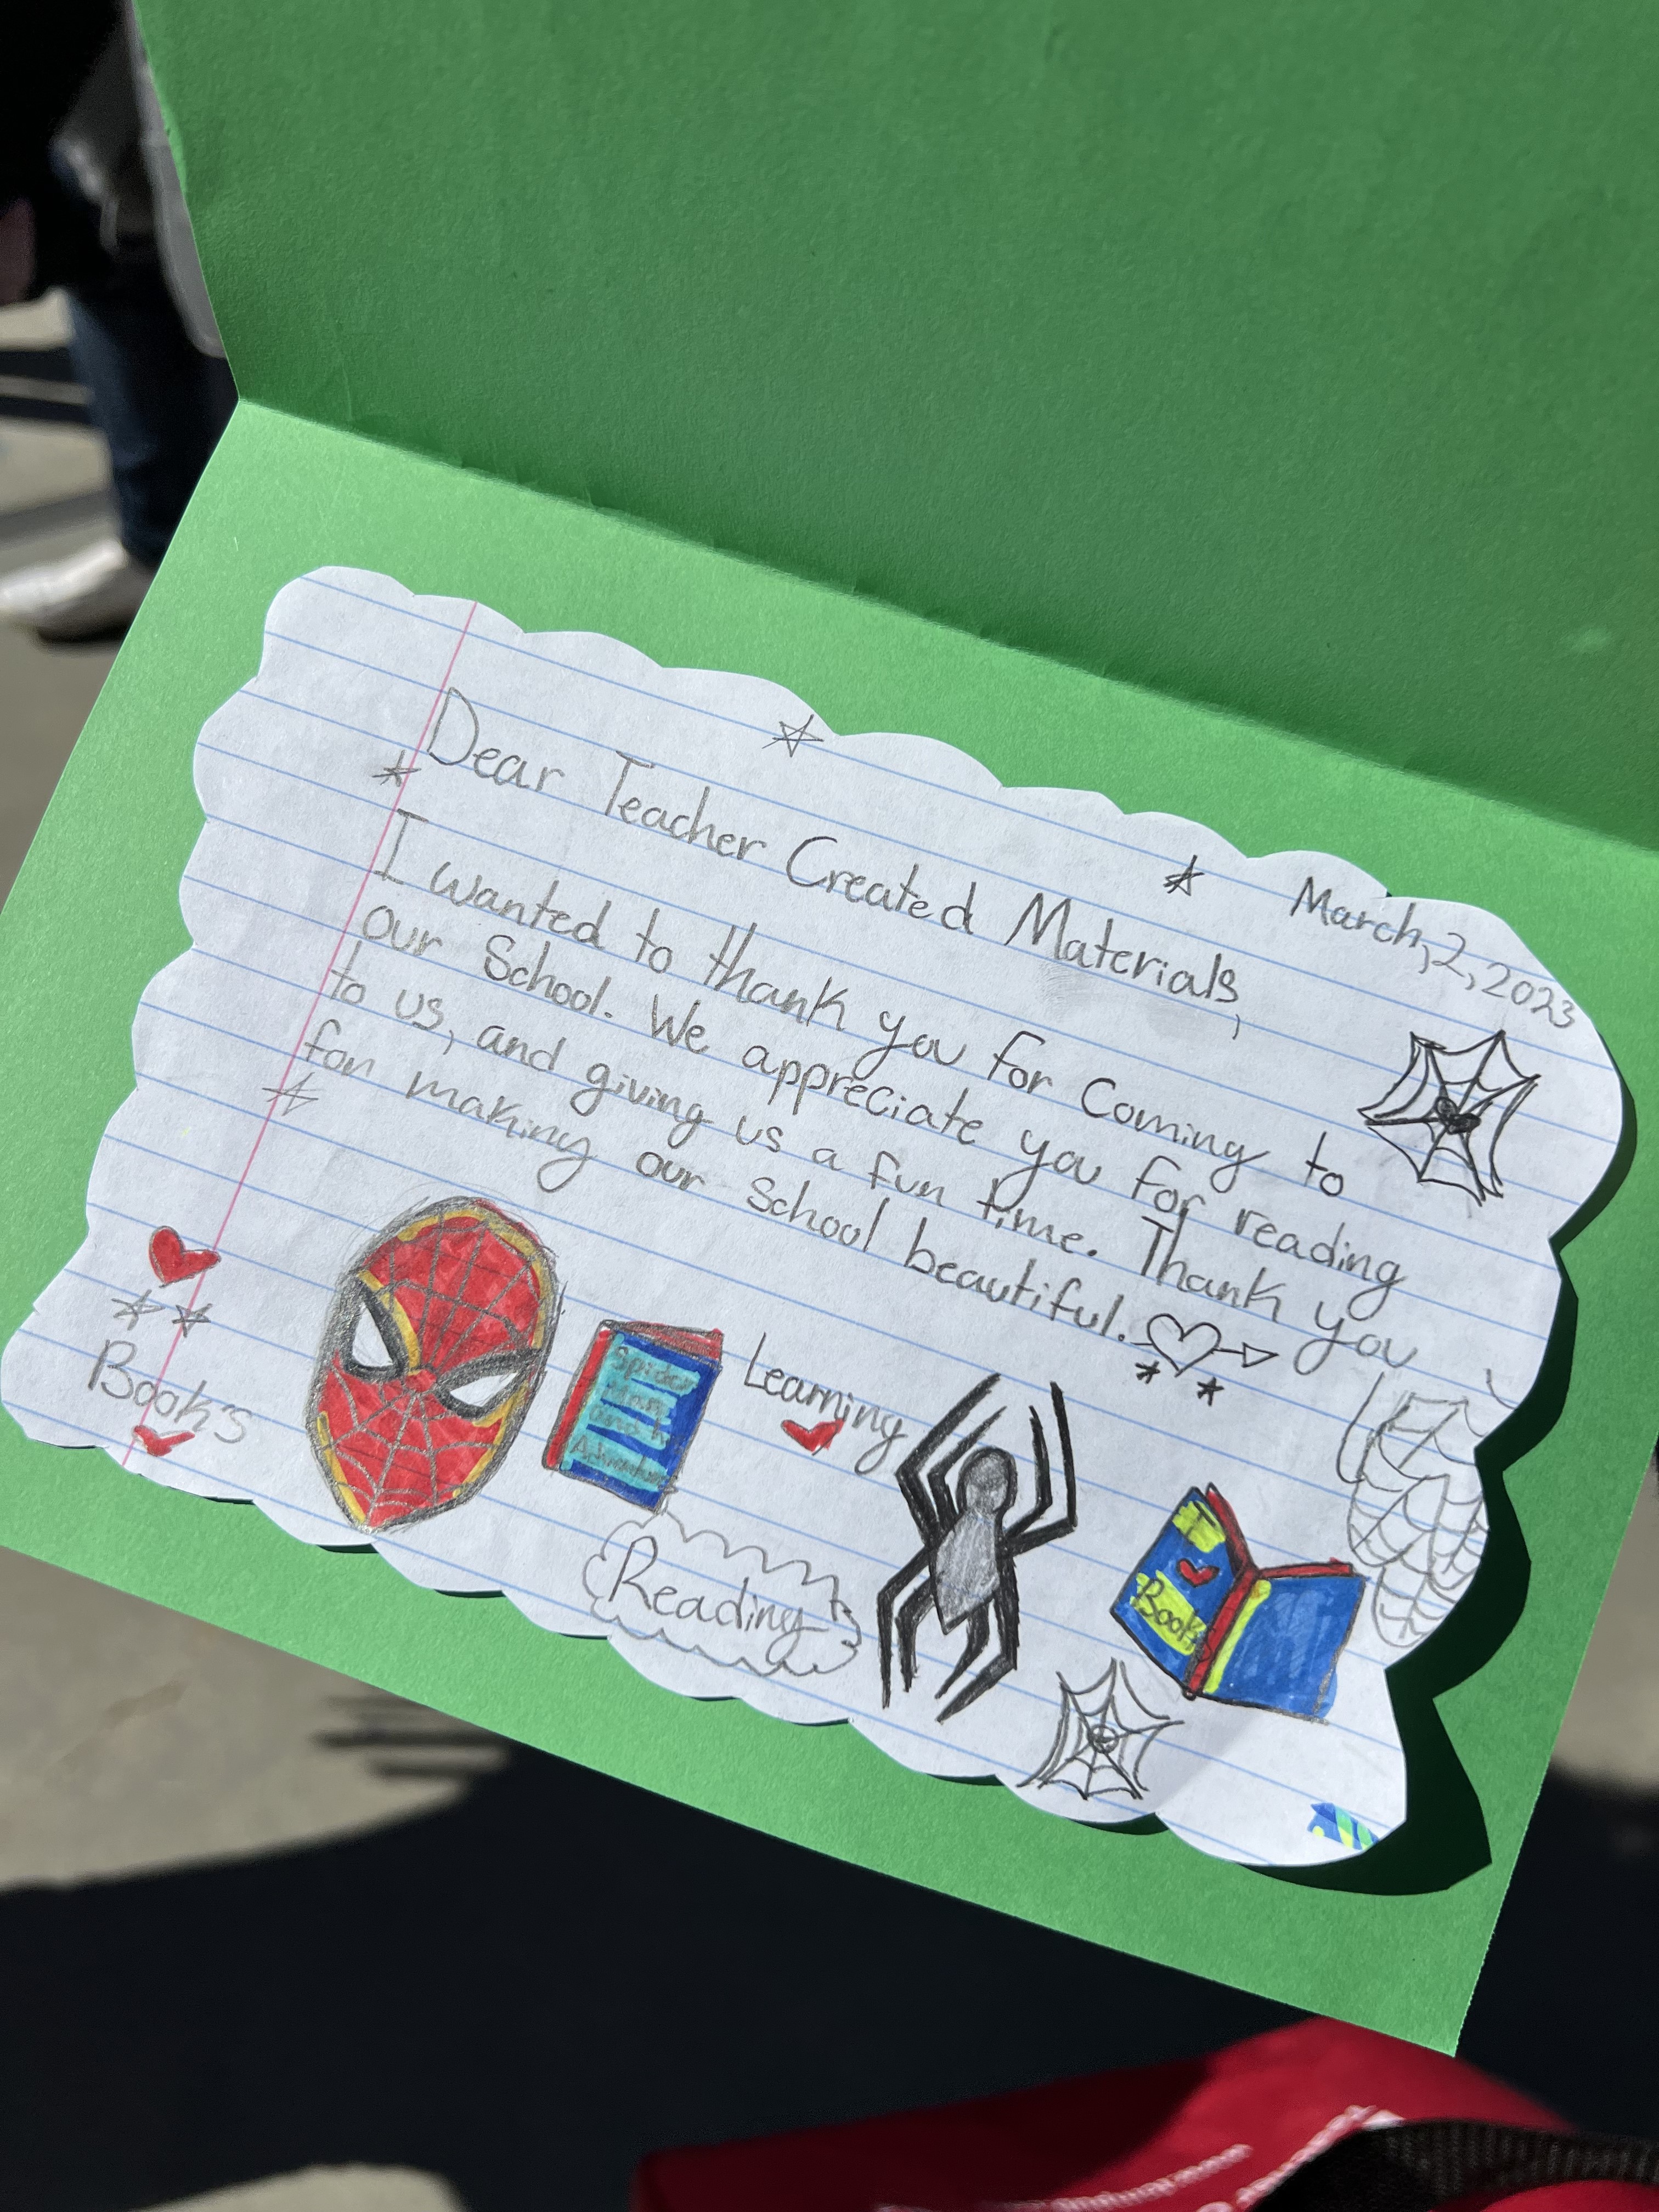 A thank you note from students after Read Across America.